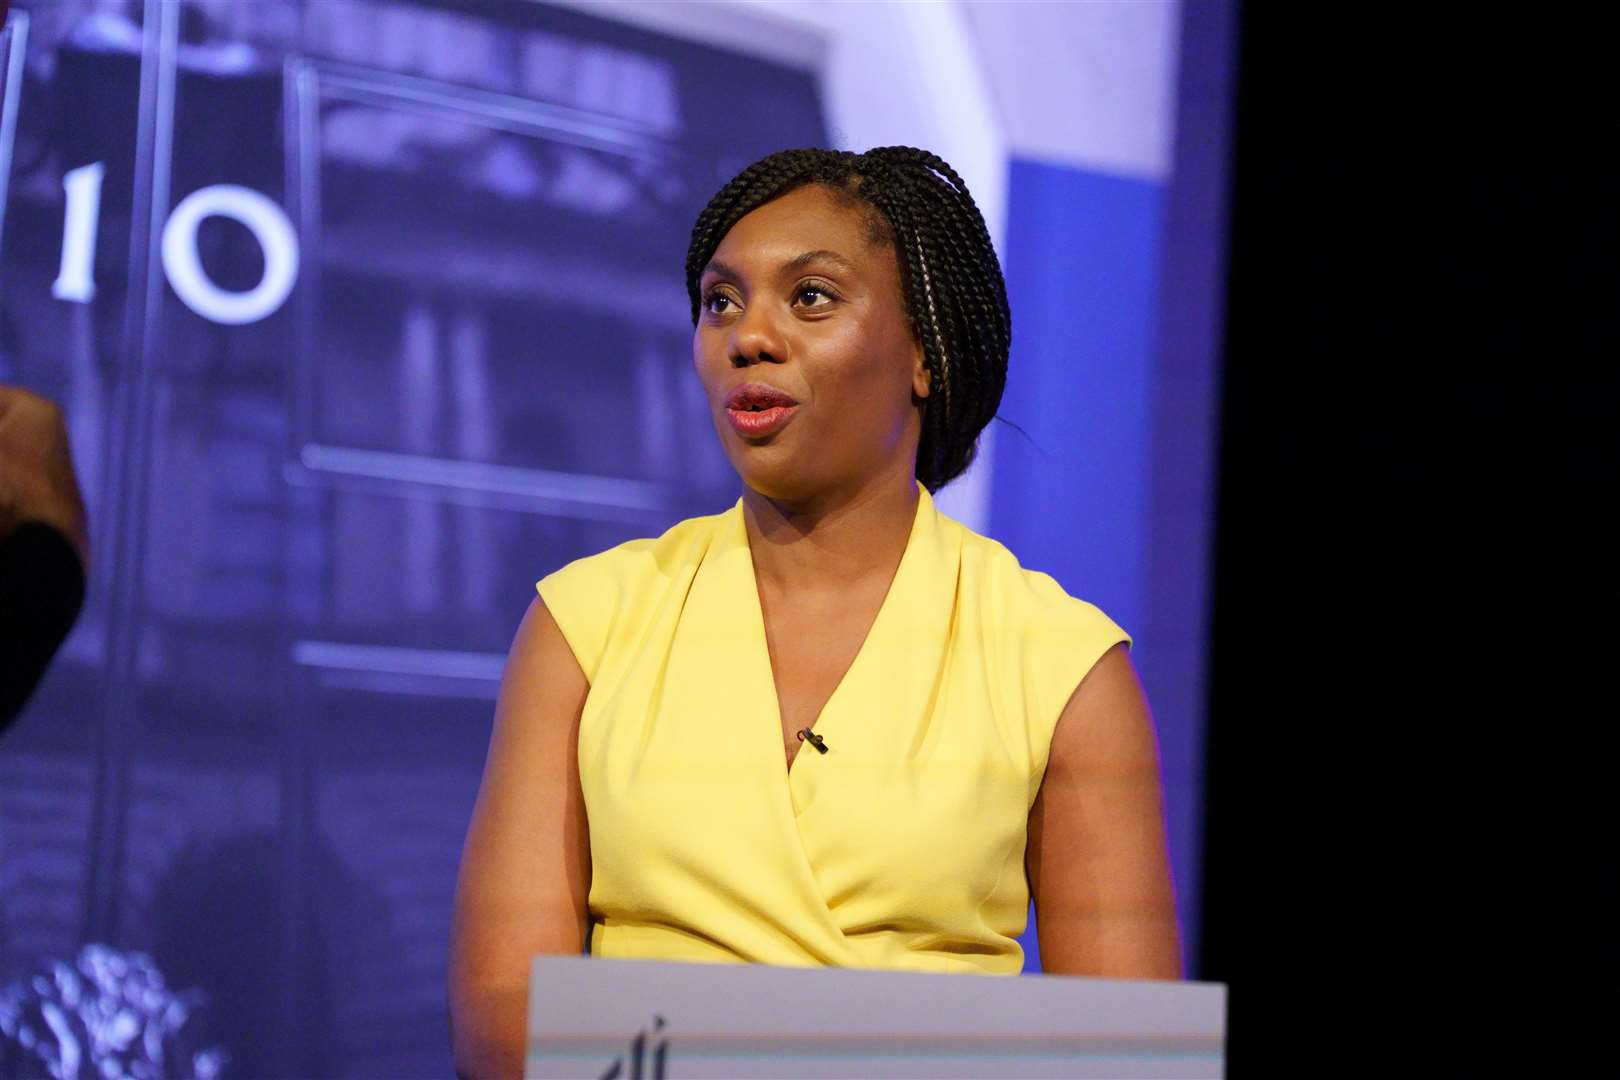 Kemi Badenoch challenged Ms Mordaunt over her record on transgender issues (Victoria Jones/PA)